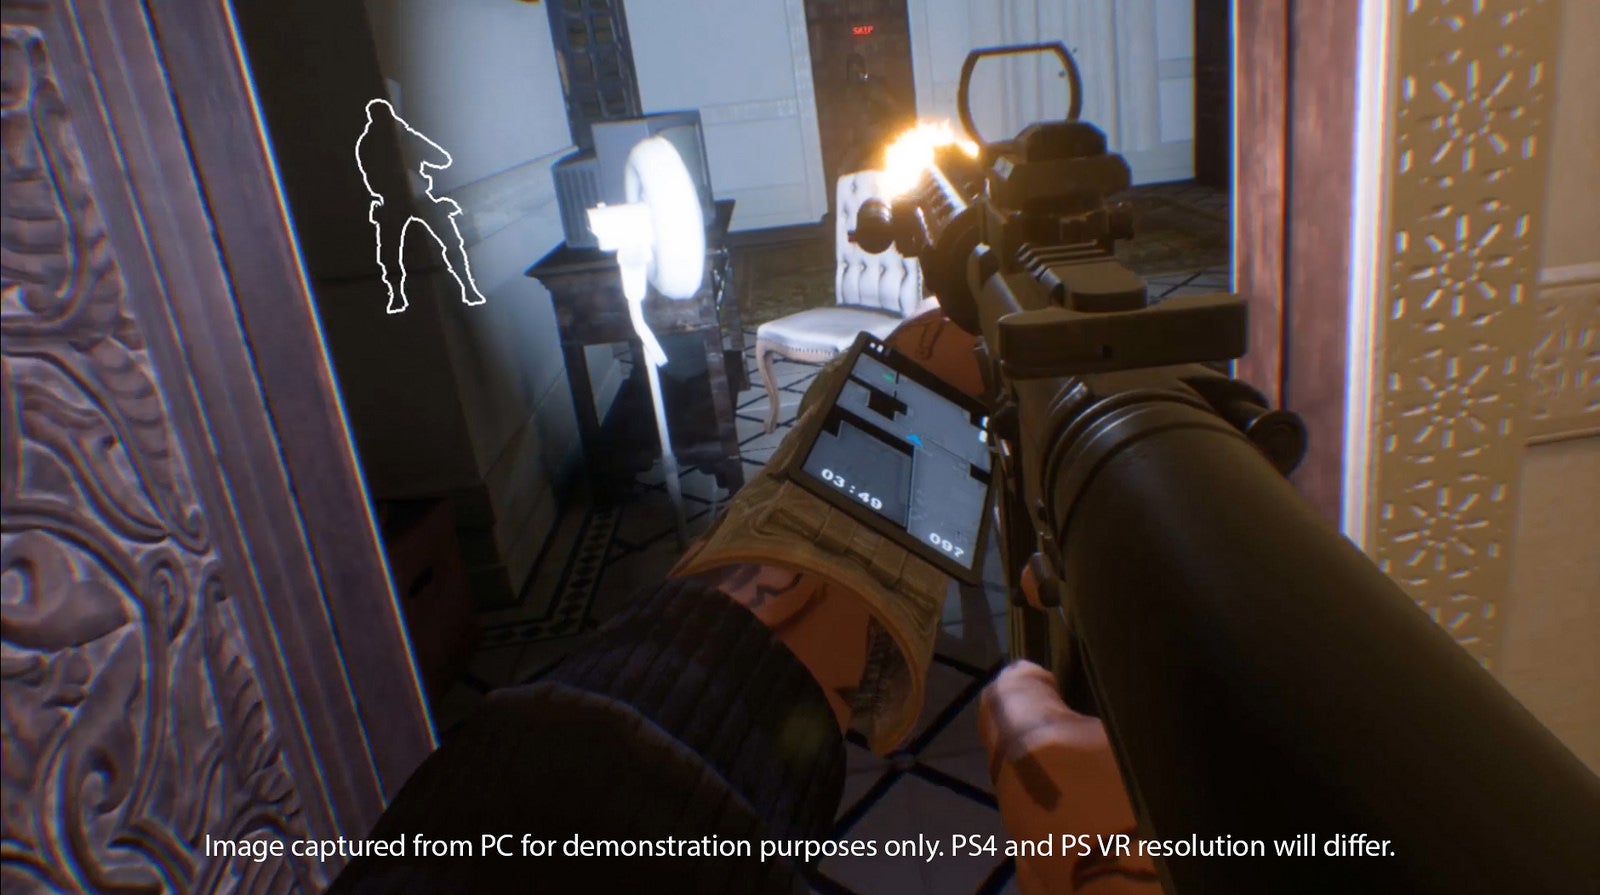 Firewall Zero Hour is a team-based, tactical multiplayer FPS coming exclusively to PSVR VG247